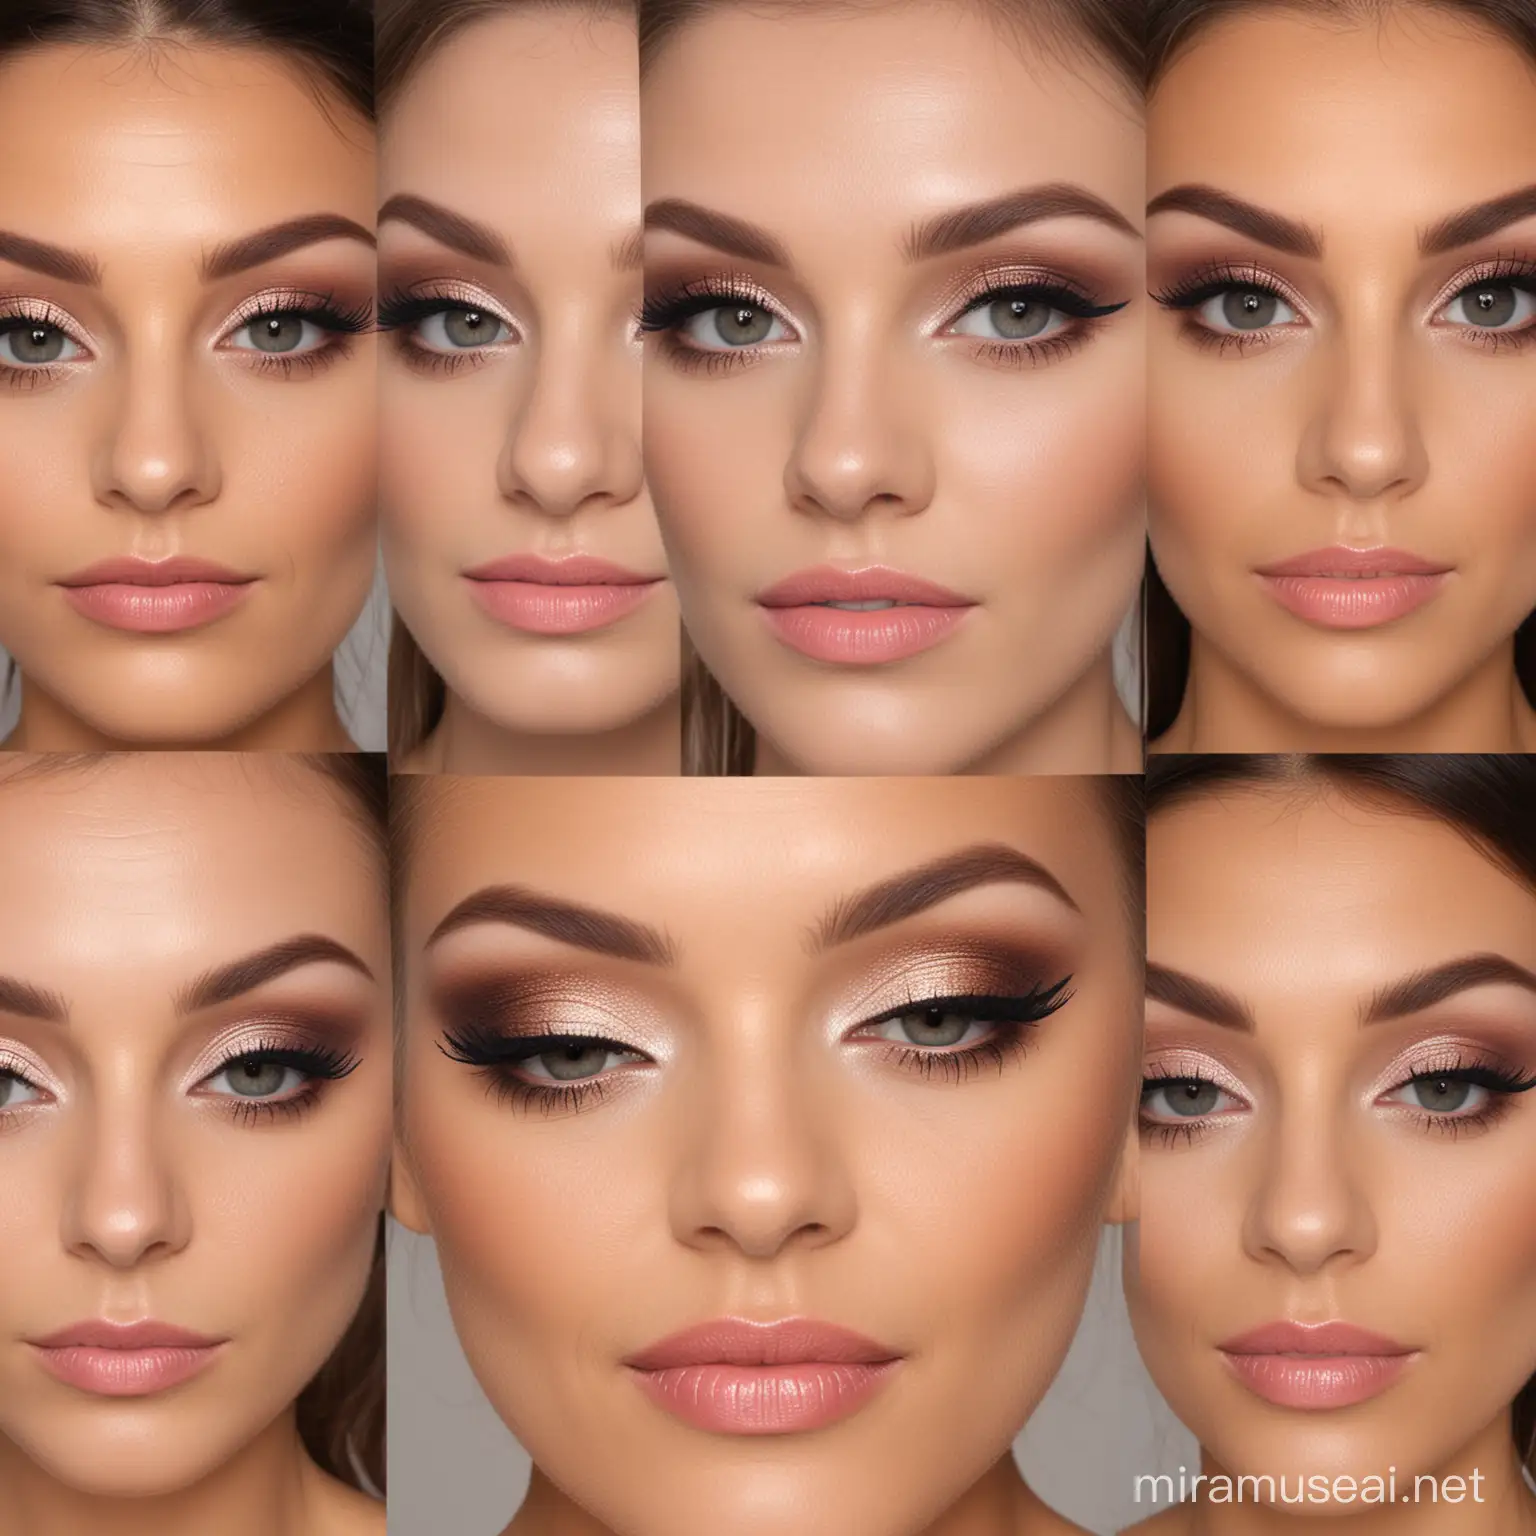 Create images that could be used for a blog post about 5 makeup looks for special occasions